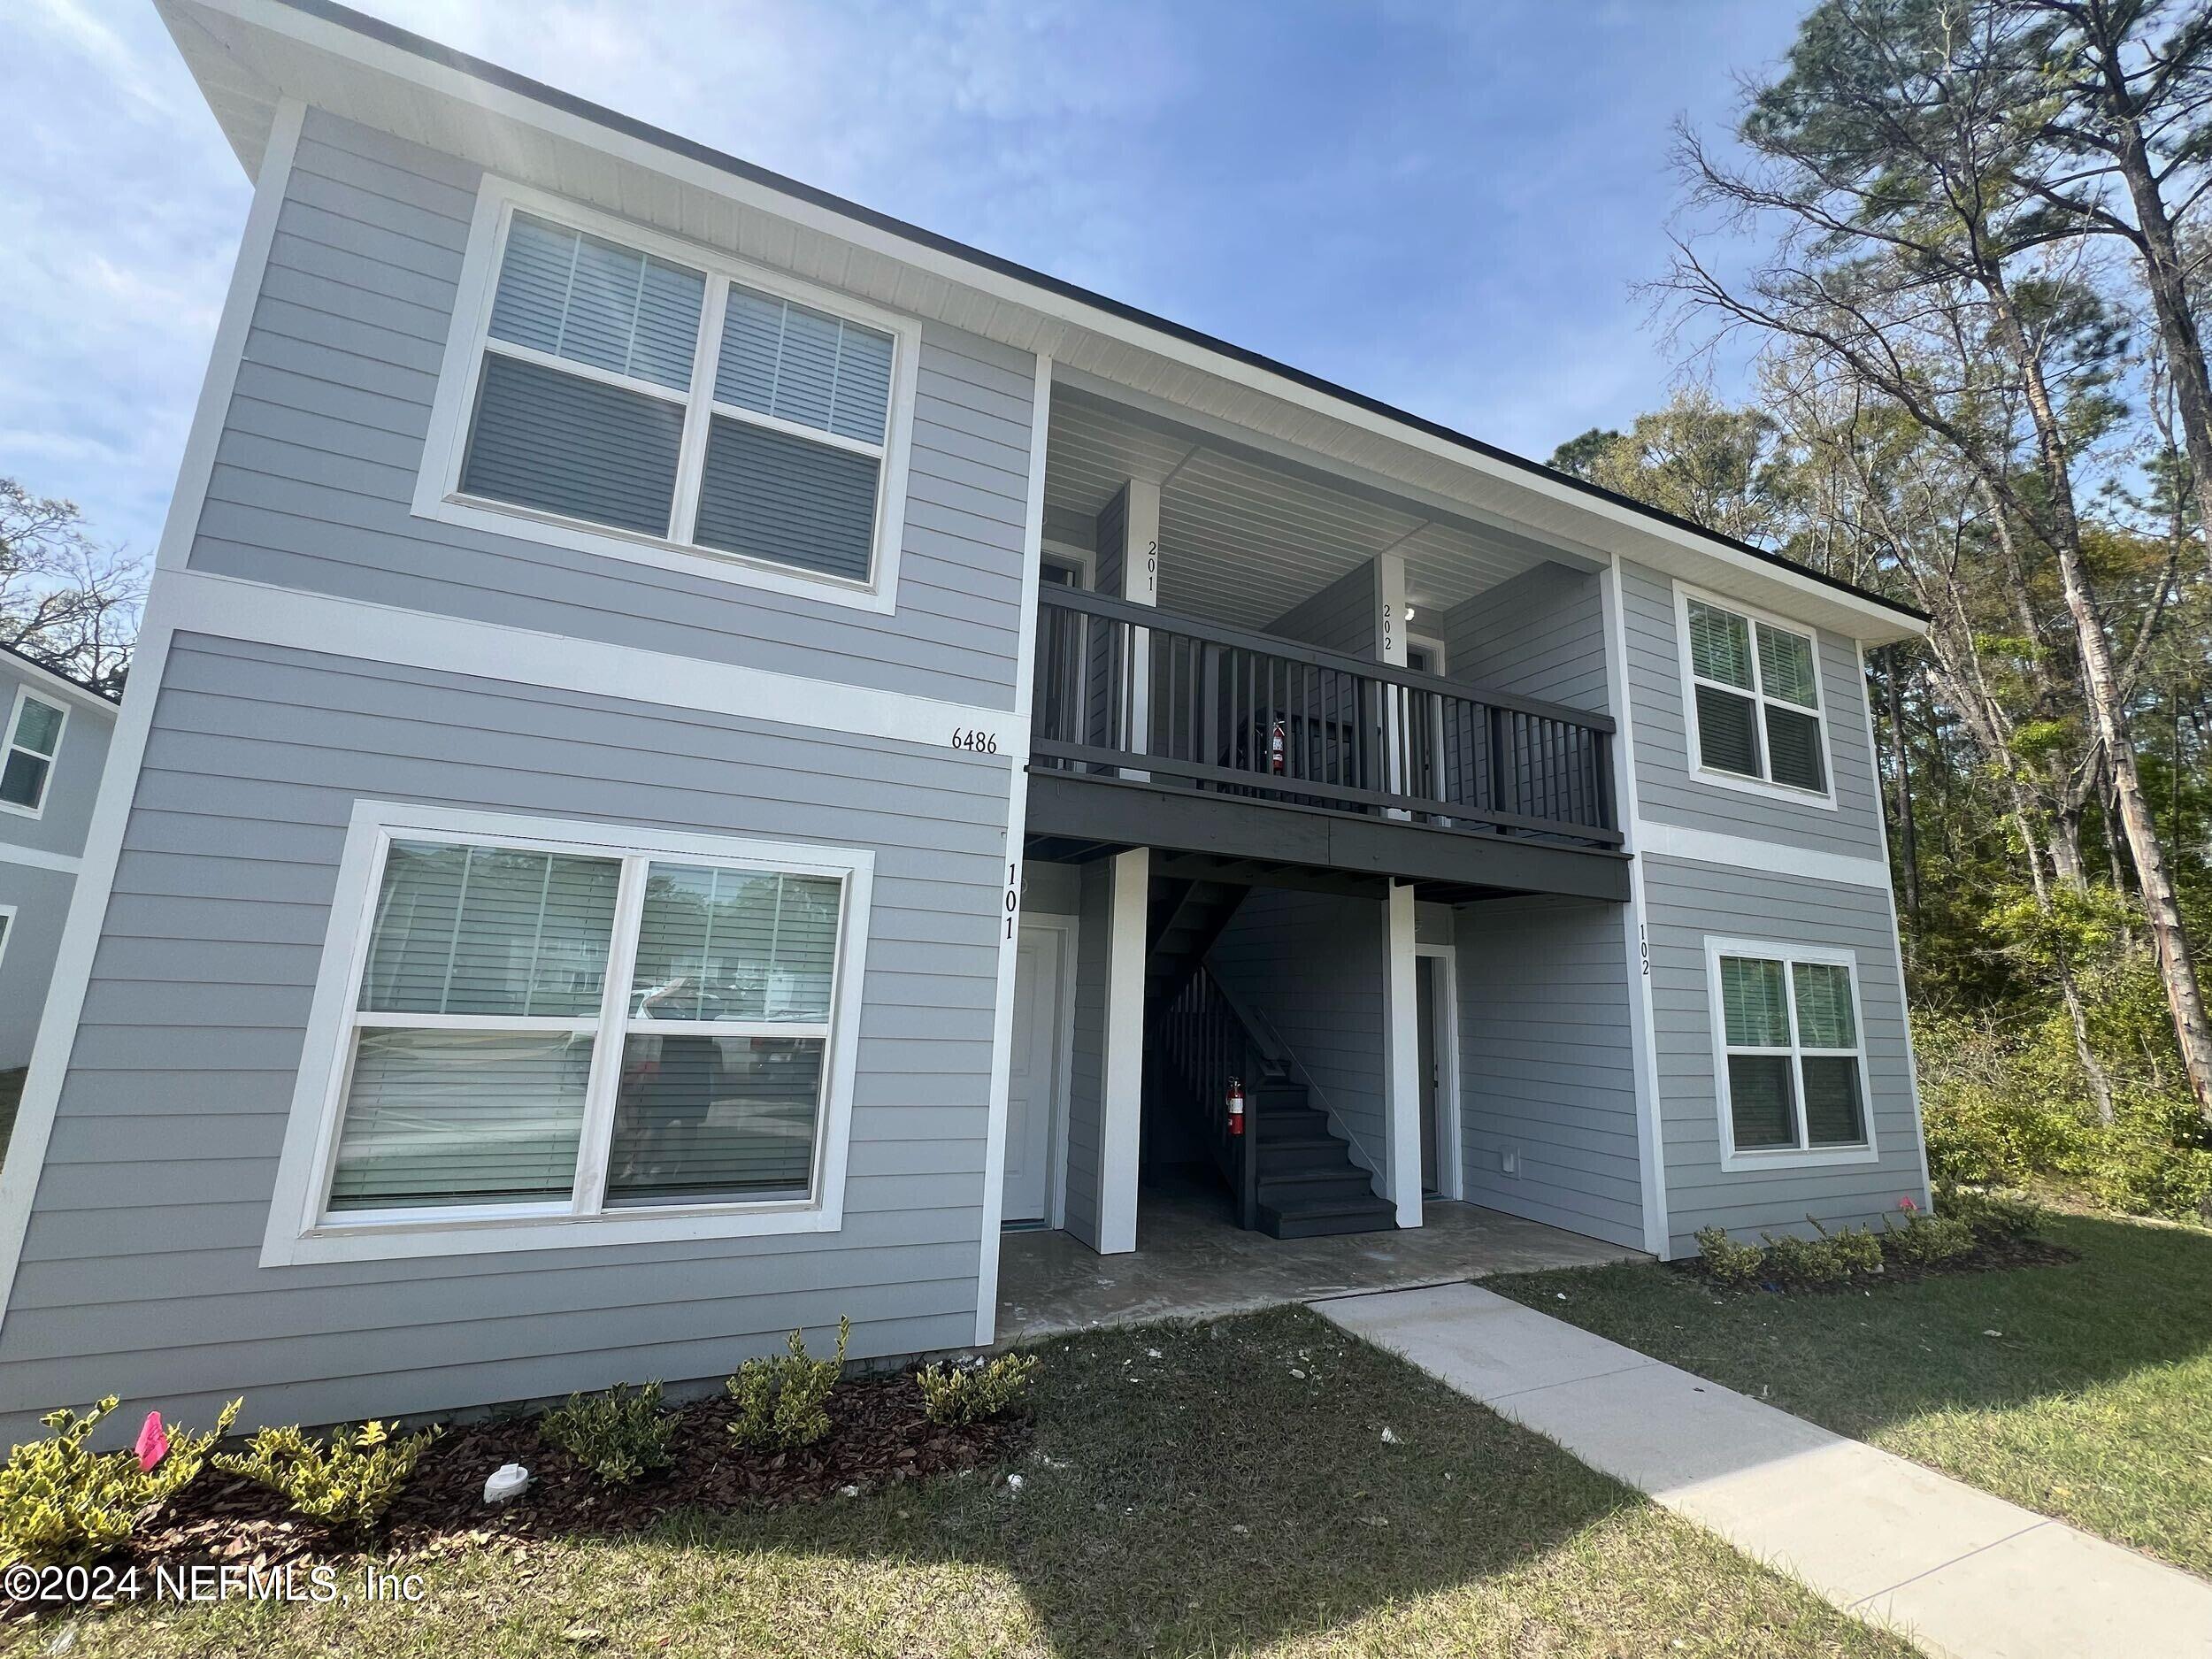 Jacksonville, FL home for sale located at 6486 Sweetbay Lane Unit 101, Jacksonville, FL 32244